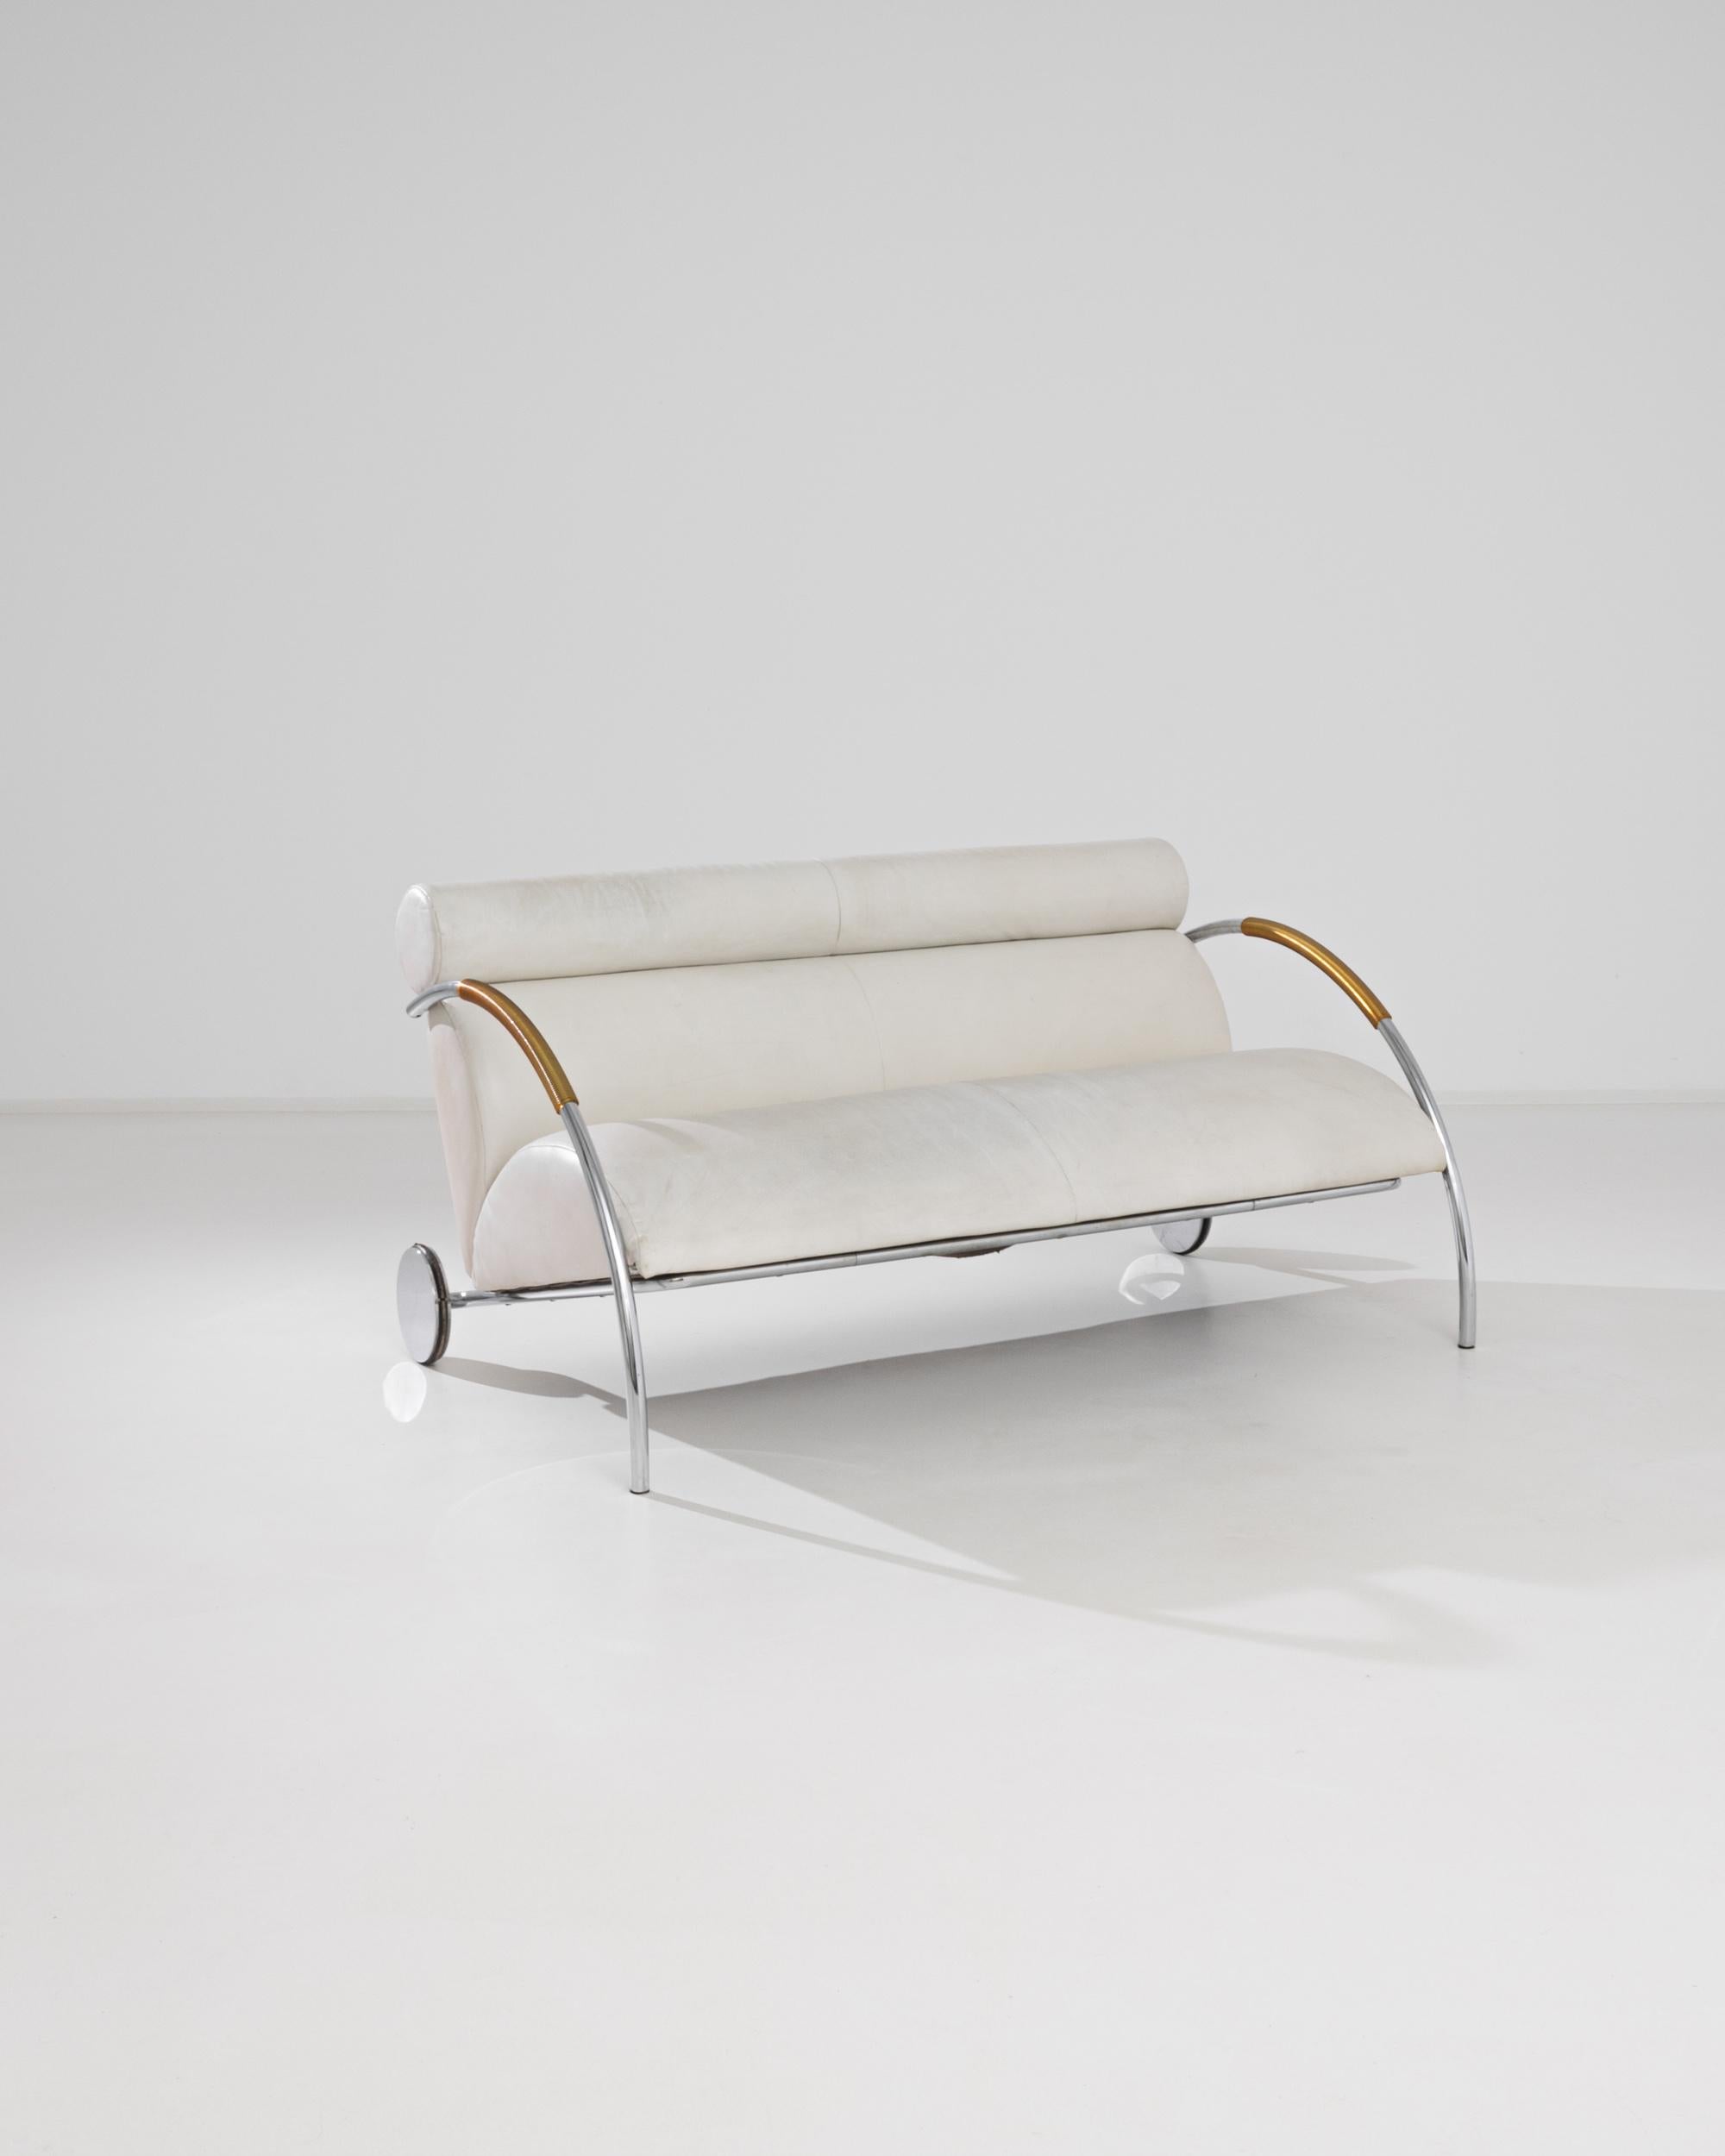 A metal sofa with upholstered seat and back designed by Peter Maly, produced in Germany circa 1980. An expanse of white leather stretches across plush cushions that appear as stacked semicircles crowned by a cylindrical headrest, flanked by swooping